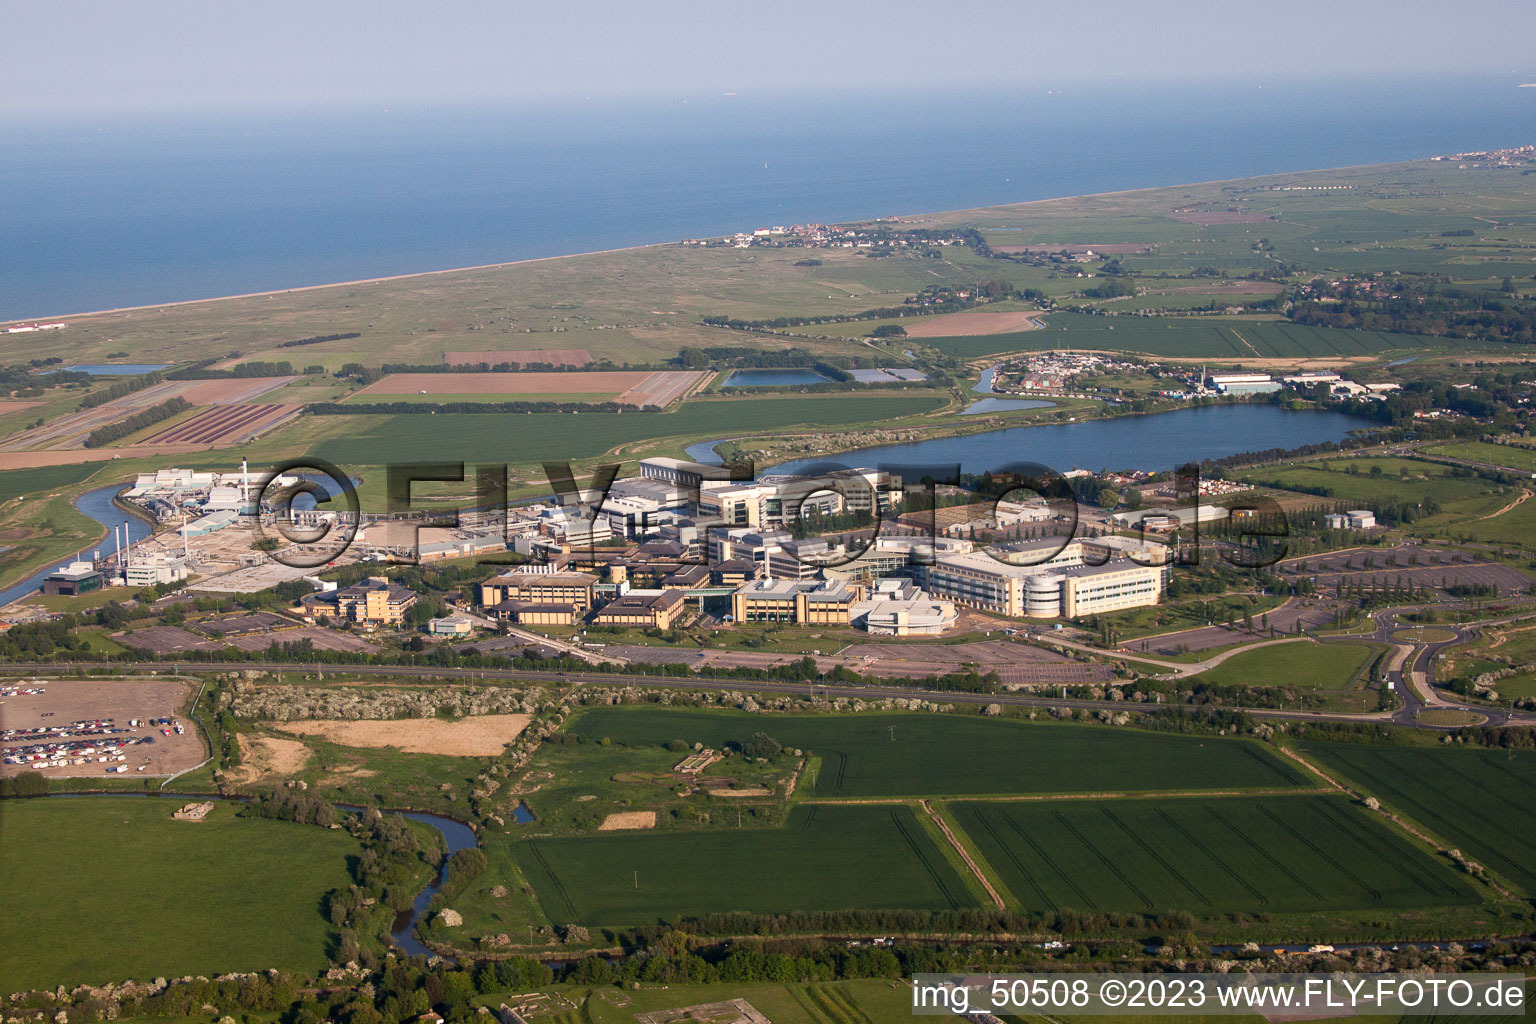 Aerial view of Building and production halls on the premises of the chemical manufacturers Pfizer Ltd and Discovery Park in Sandwich in England, United Kingdom